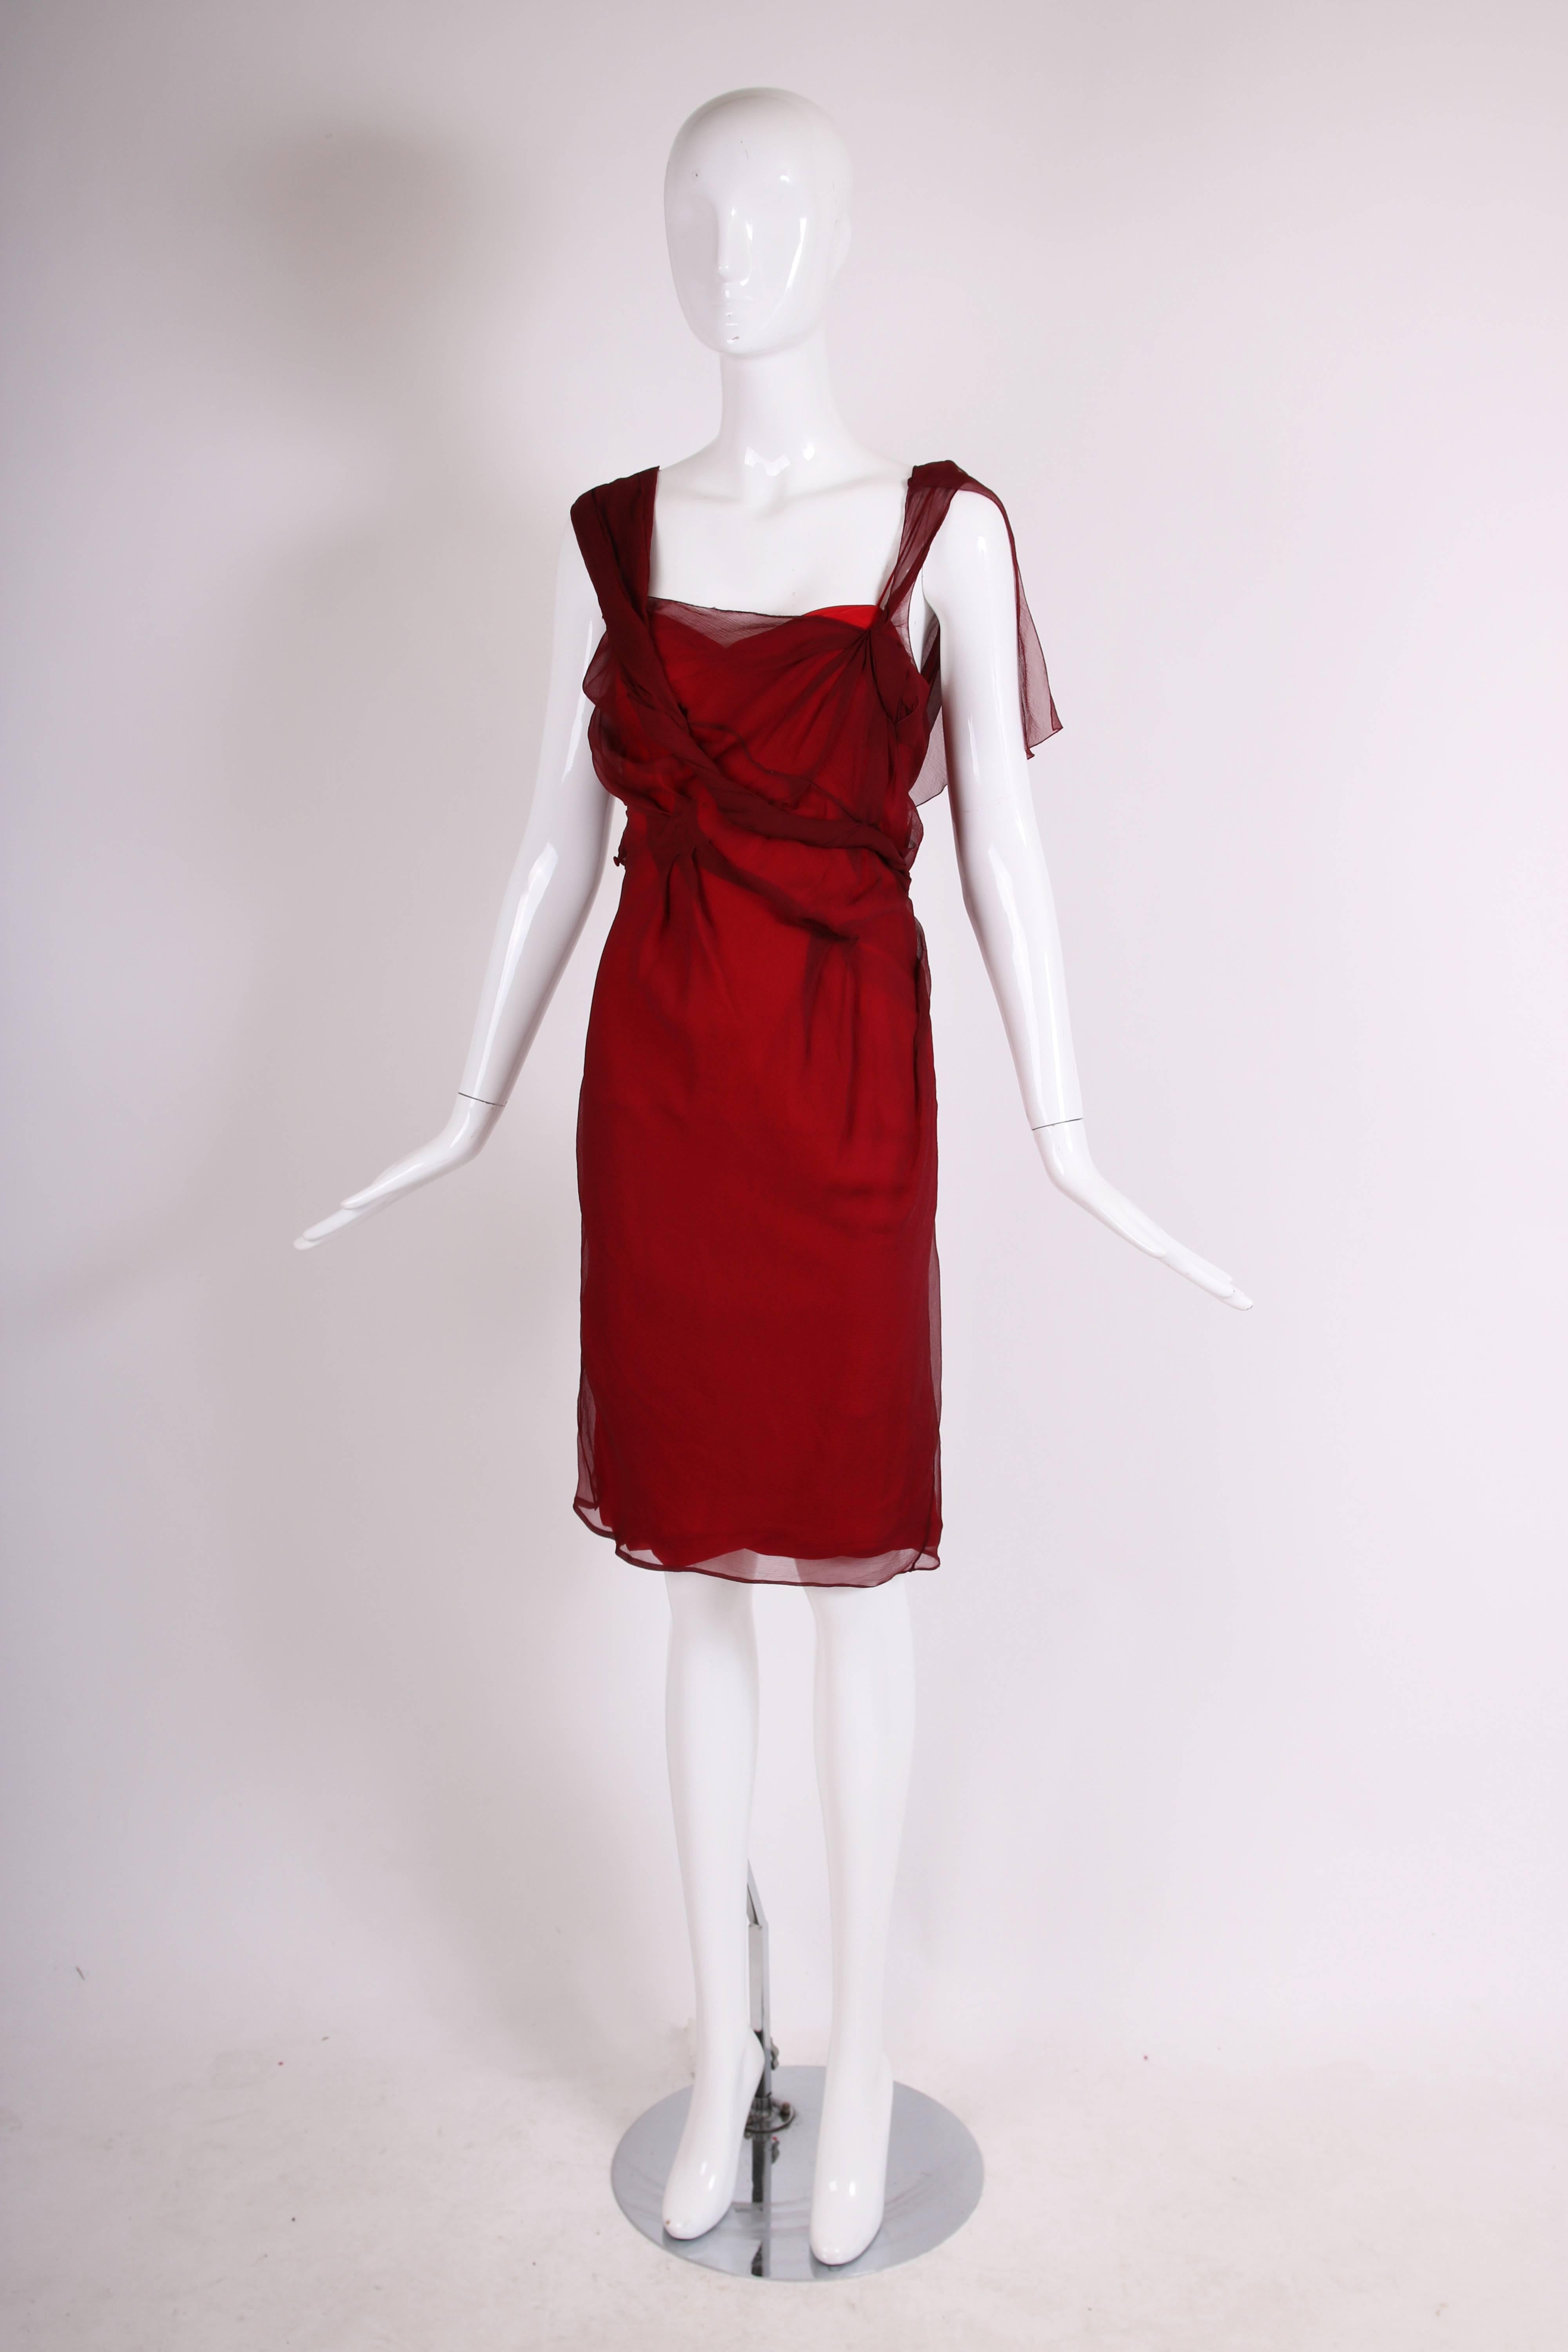 Christian Dior by John Galliano burgundy chiffon double layered cocktail dress with asymmetric fabric pattern at top layer. In excellent condition - no size tag, please consult measurements. 
MEASUREMENTS:
Bust - approx. 30-32